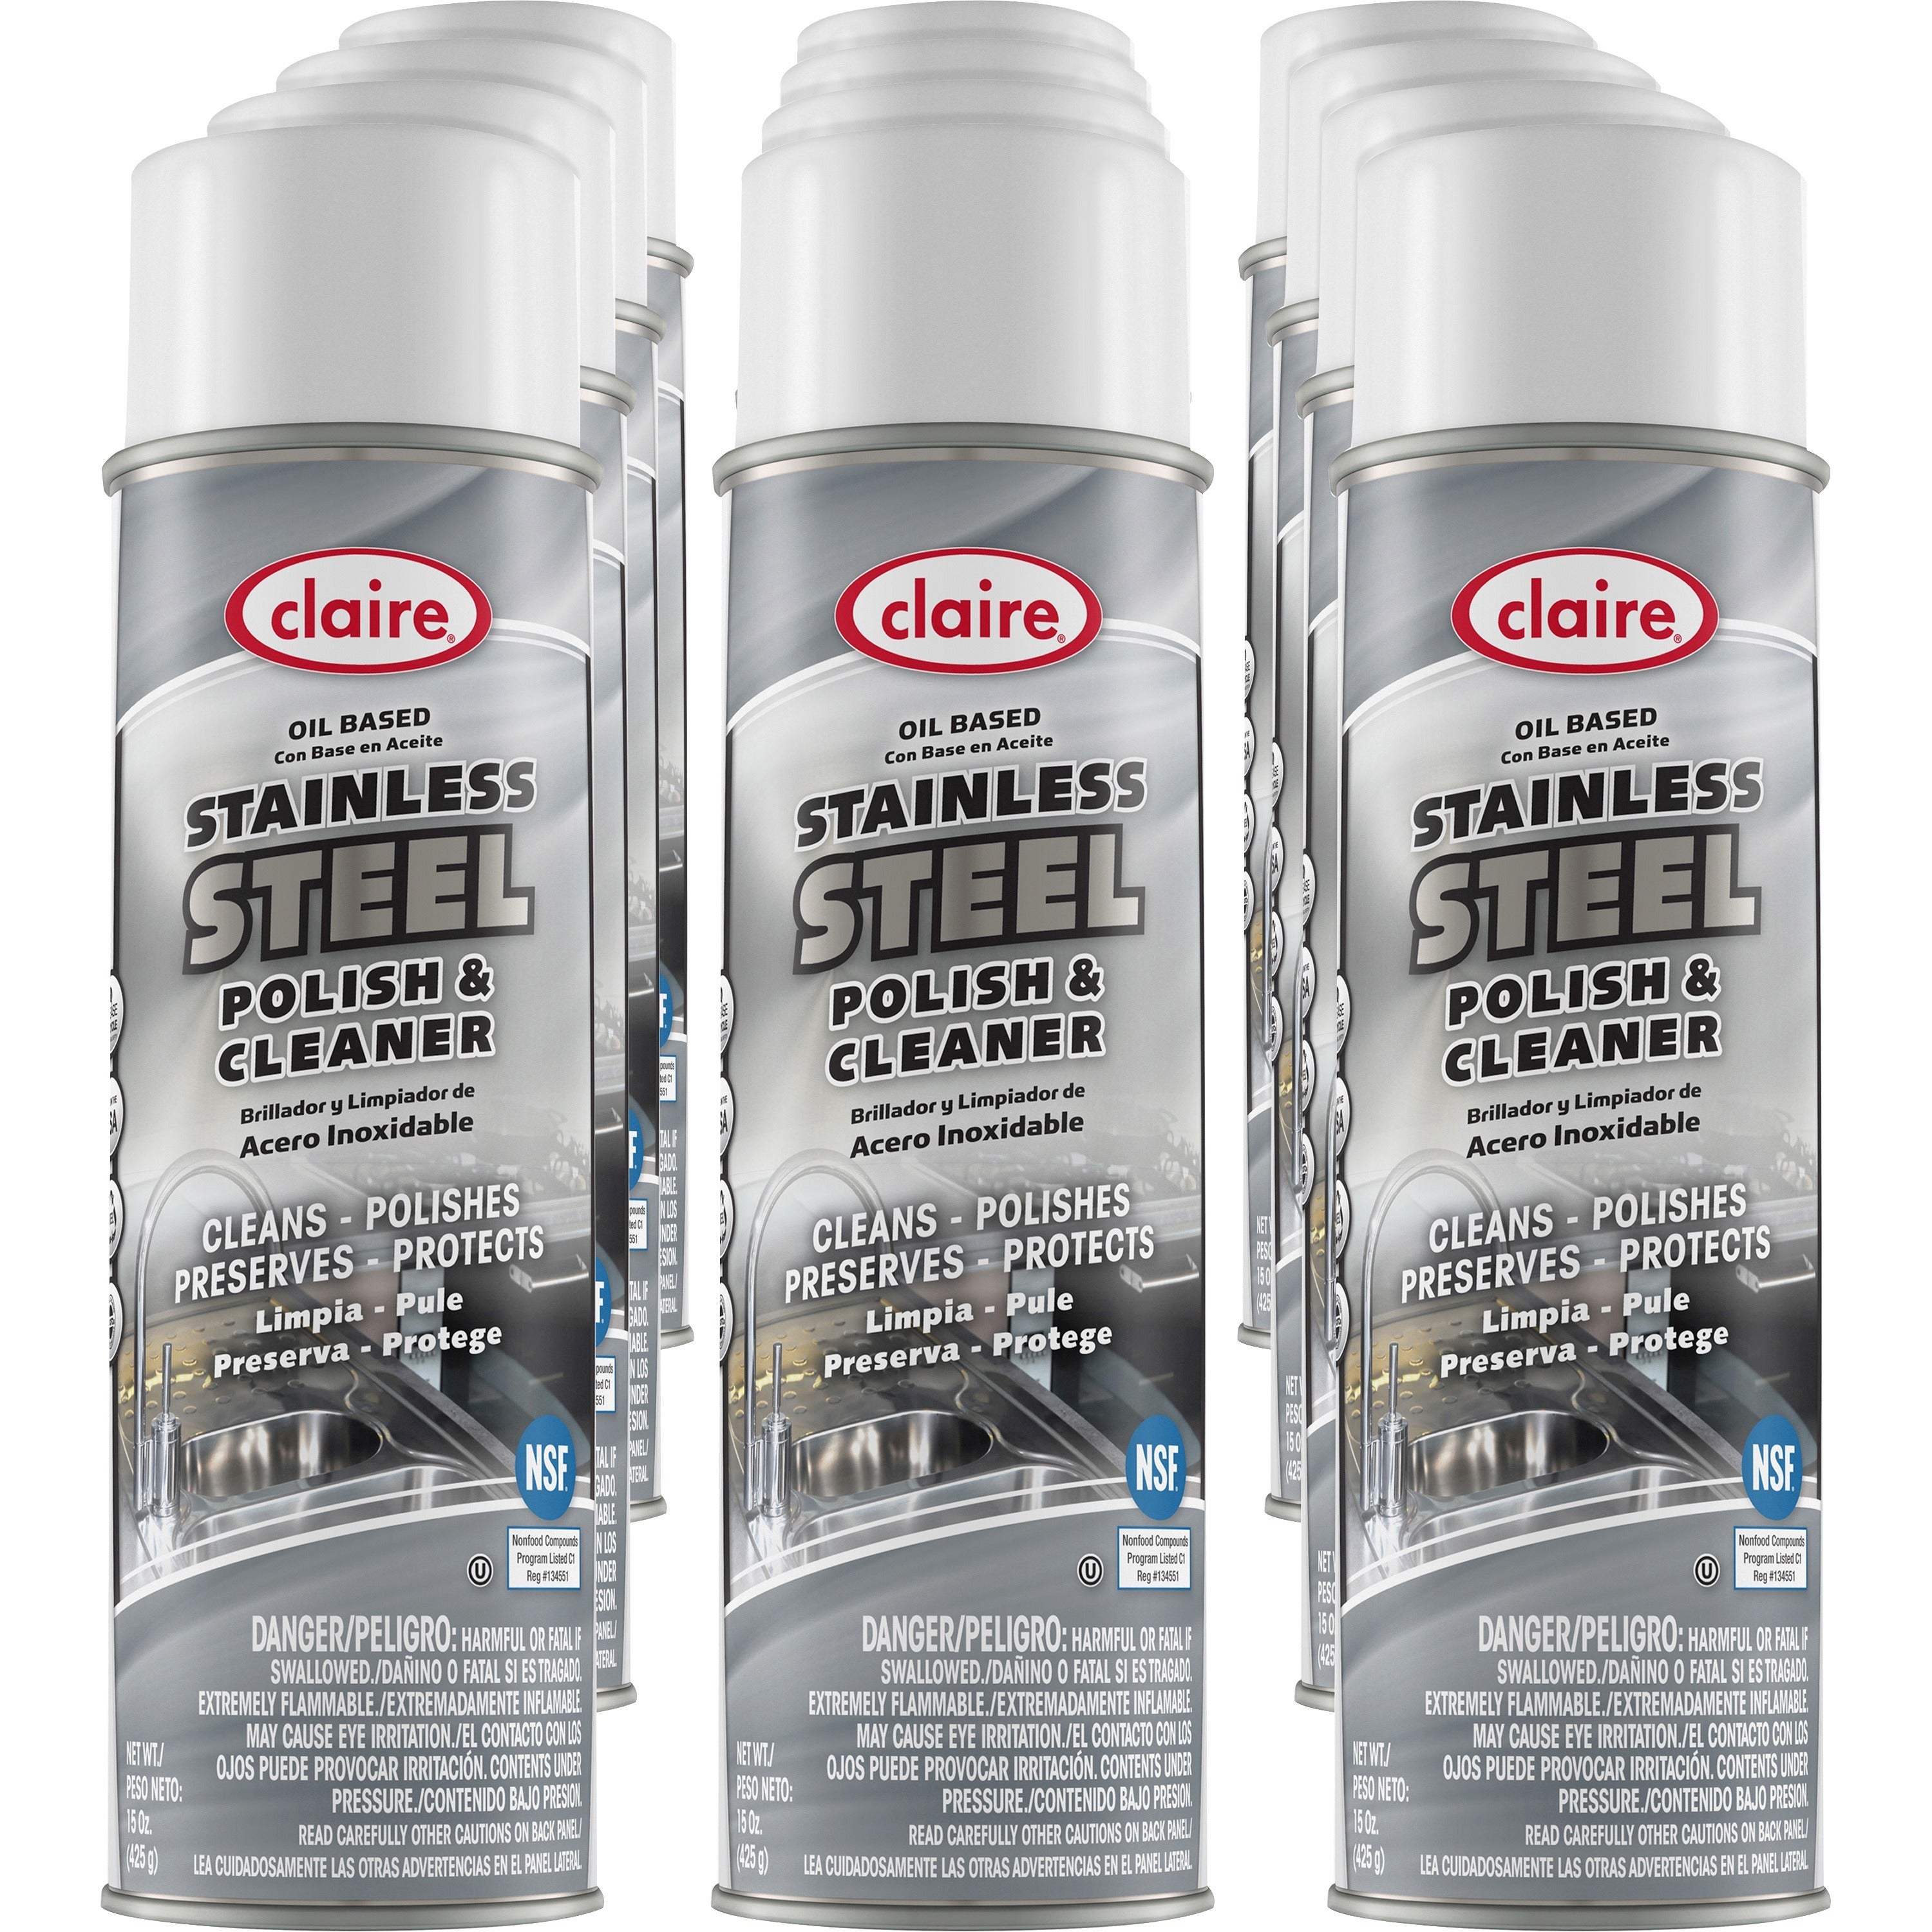 claire-stainless-steel-polish-and-cleaner-15-fl-oz-05-quart-lemon-scentcan-12-pack-non-abrasive-cfc-free-clear_cgccl841 - 1